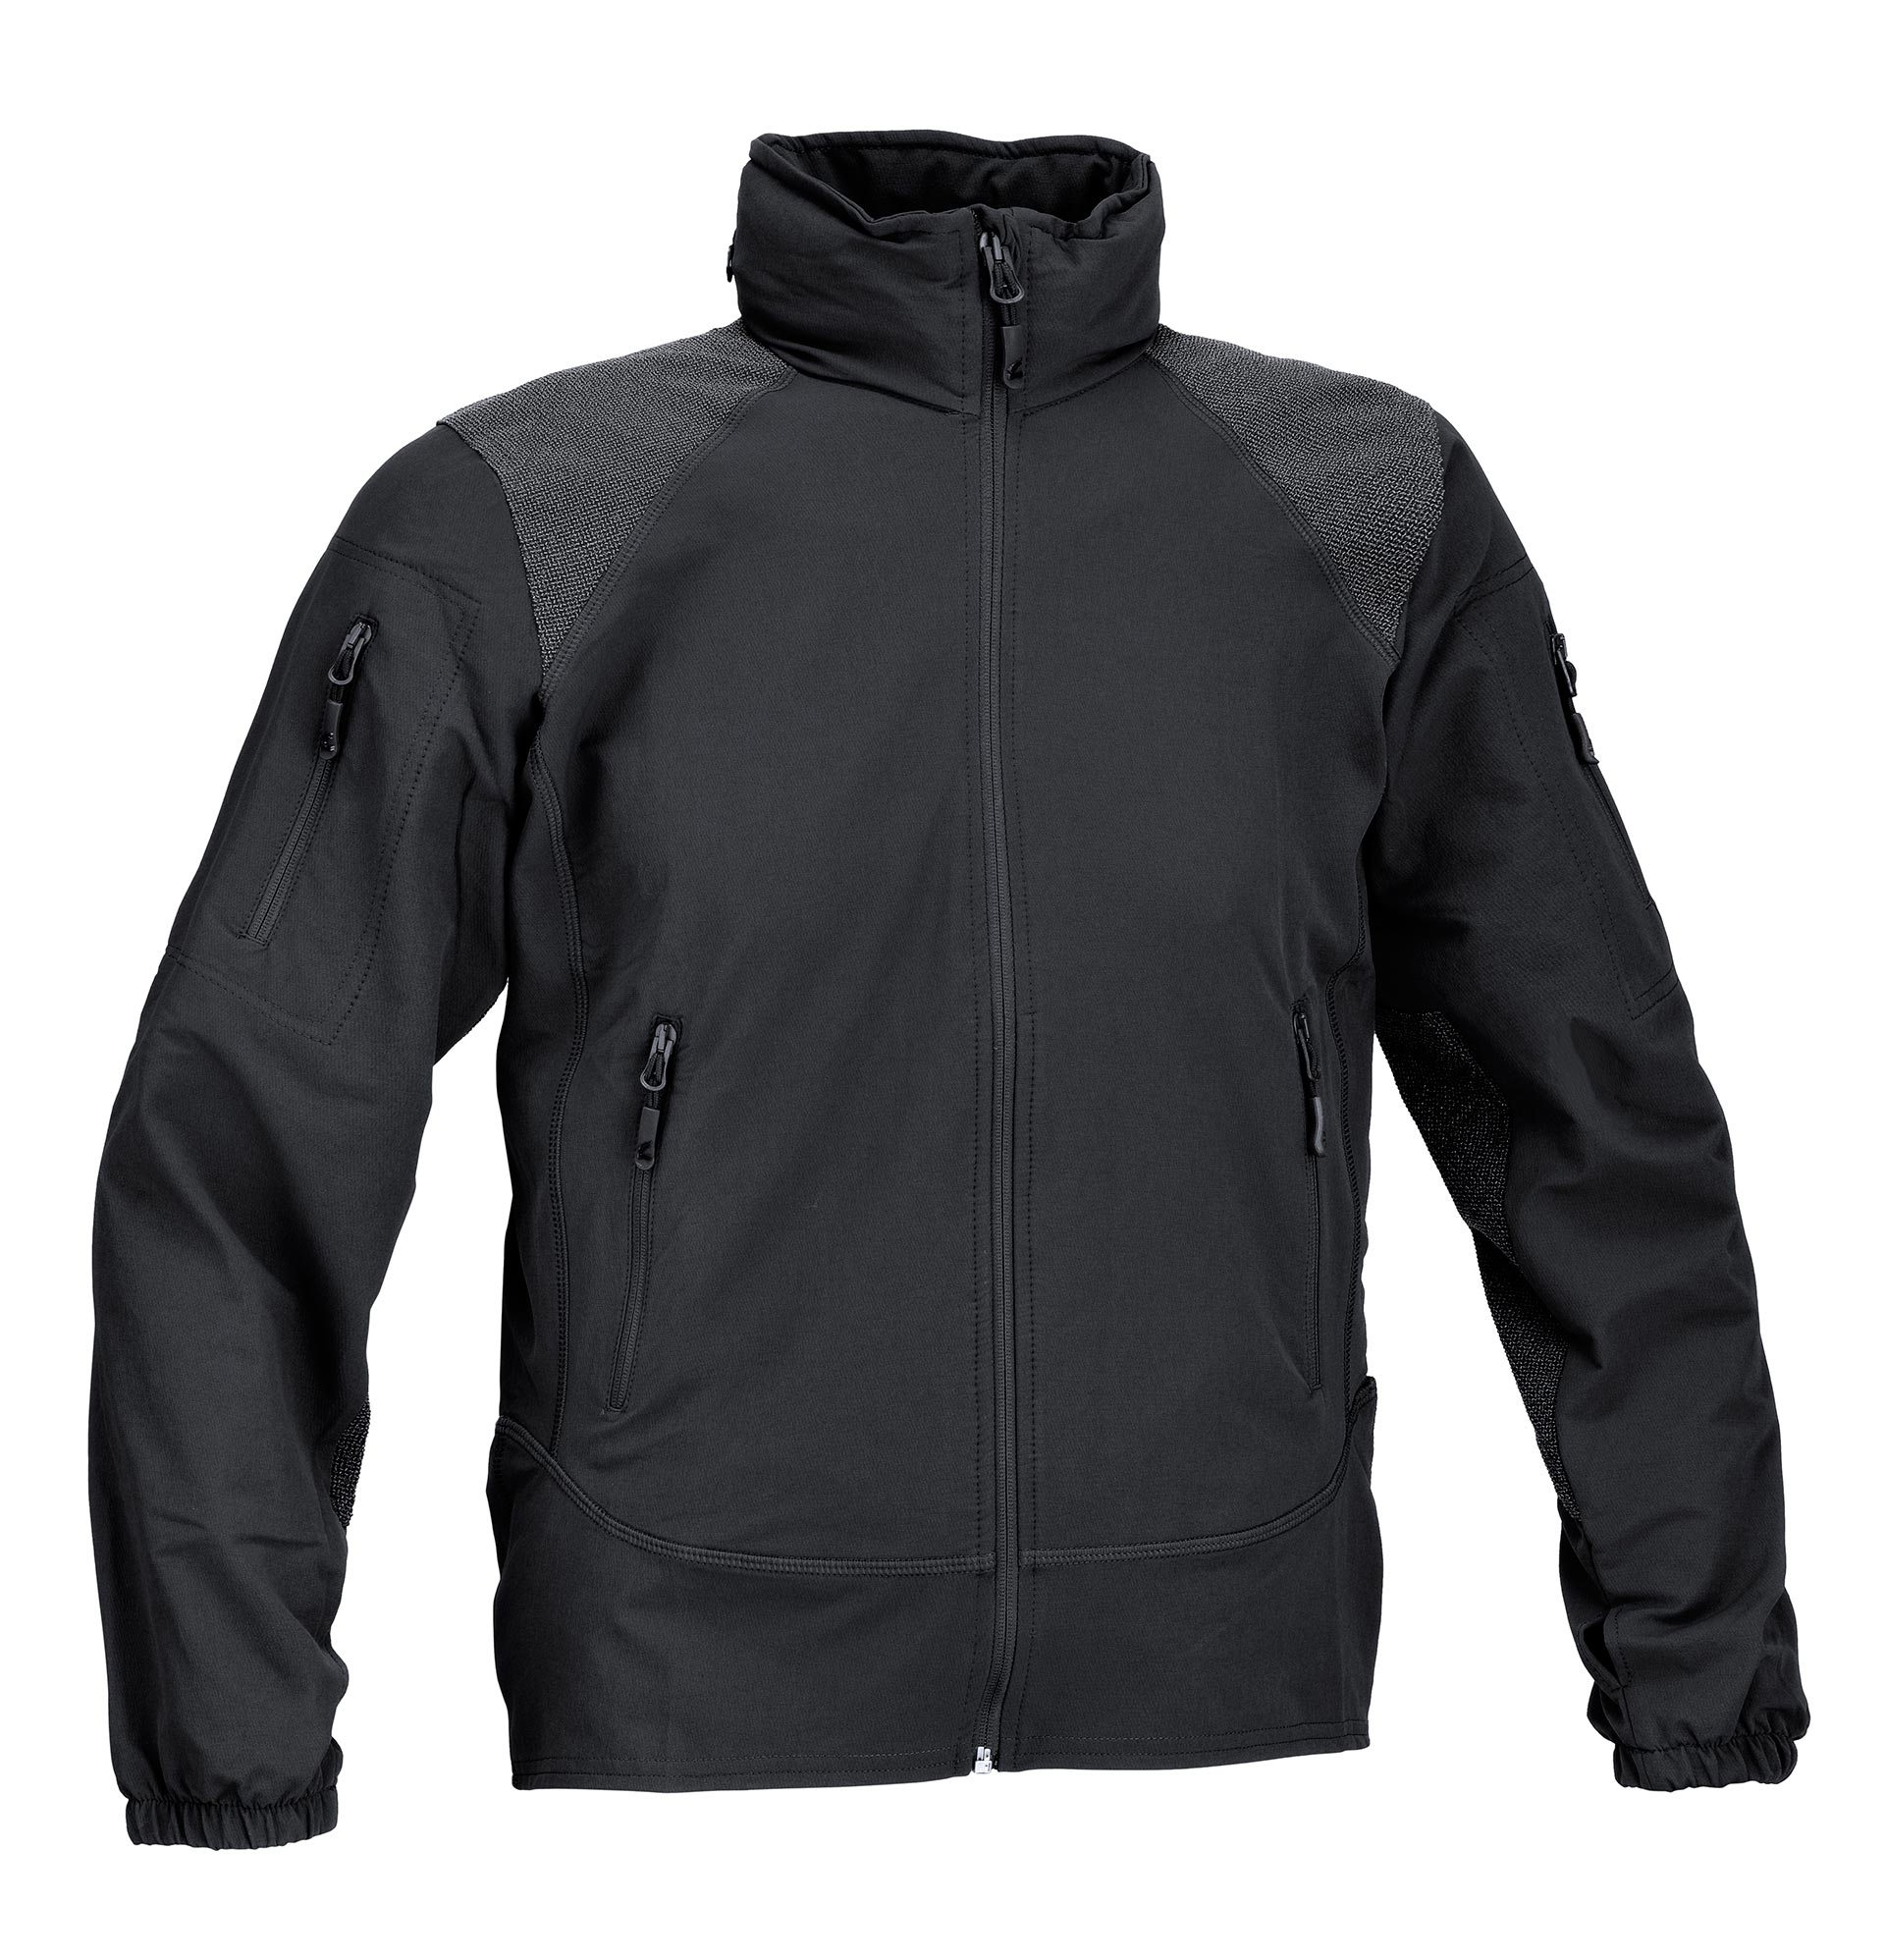 EXTREME-STRETCH JACKET WITH KEVLAR INSERT - D5-BR2479 - Discontinued ...